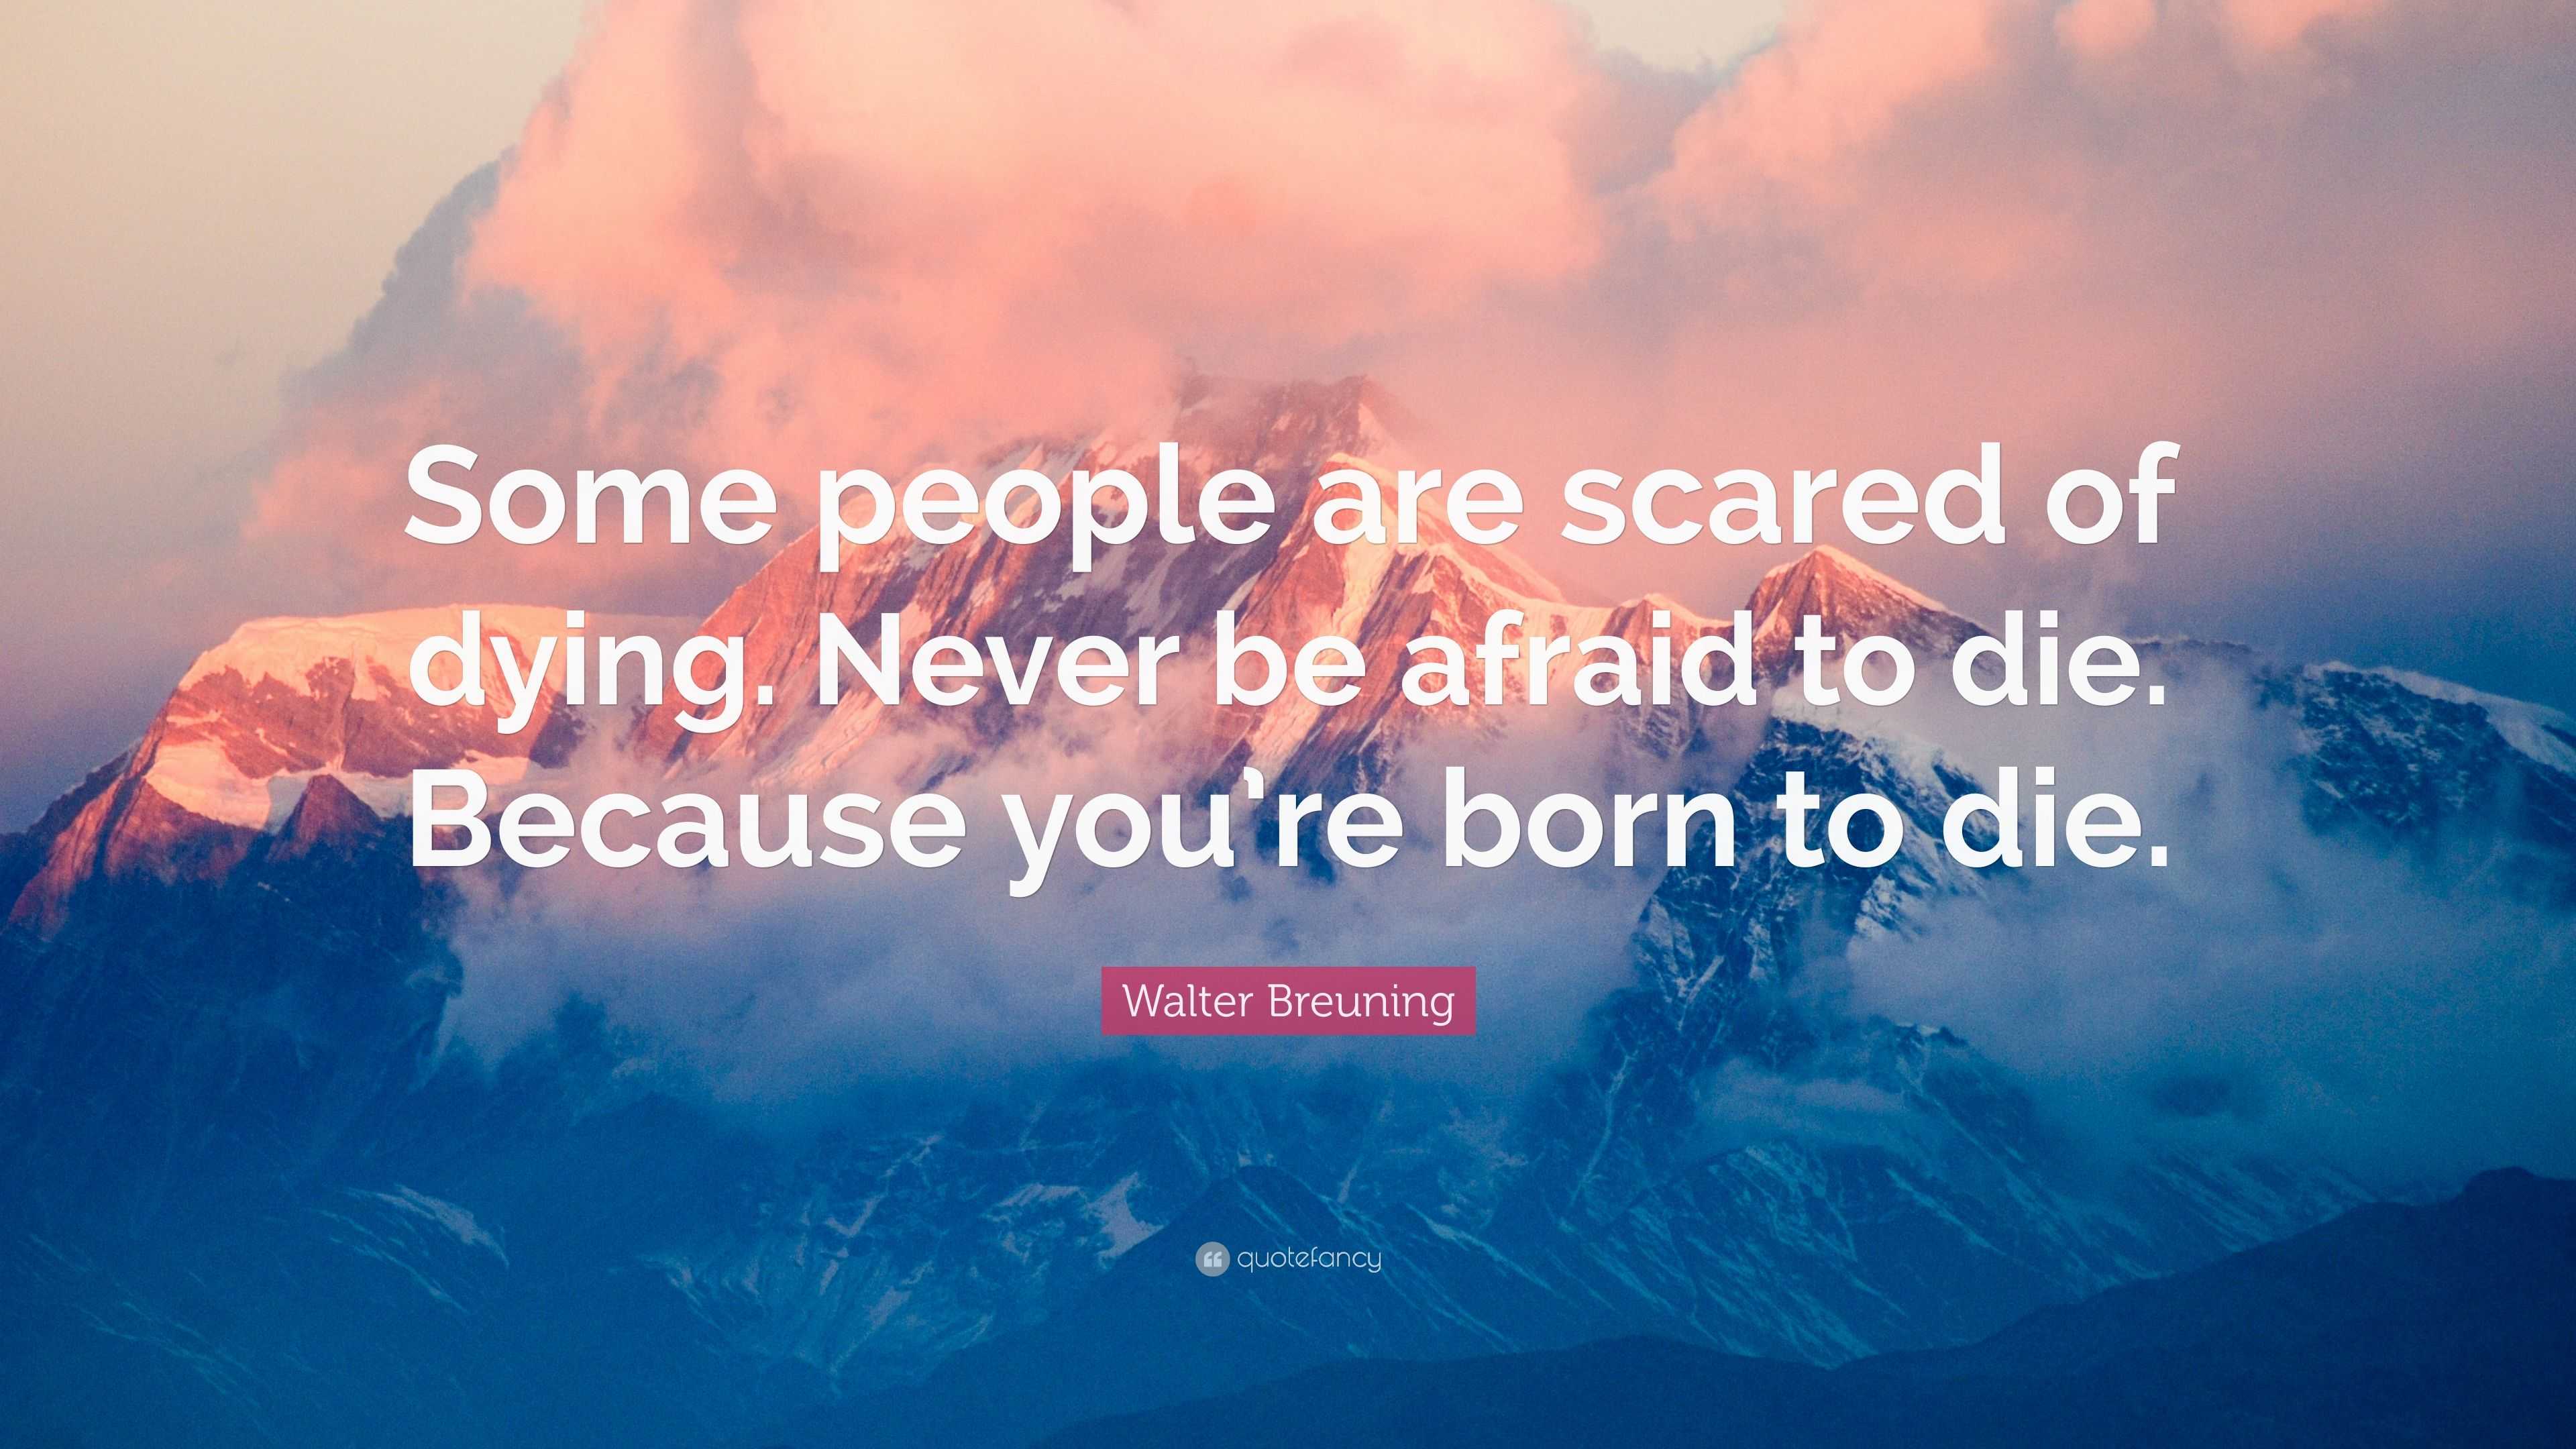 Walter Breuning Quote: “Some people are scared of dying. Never be ...